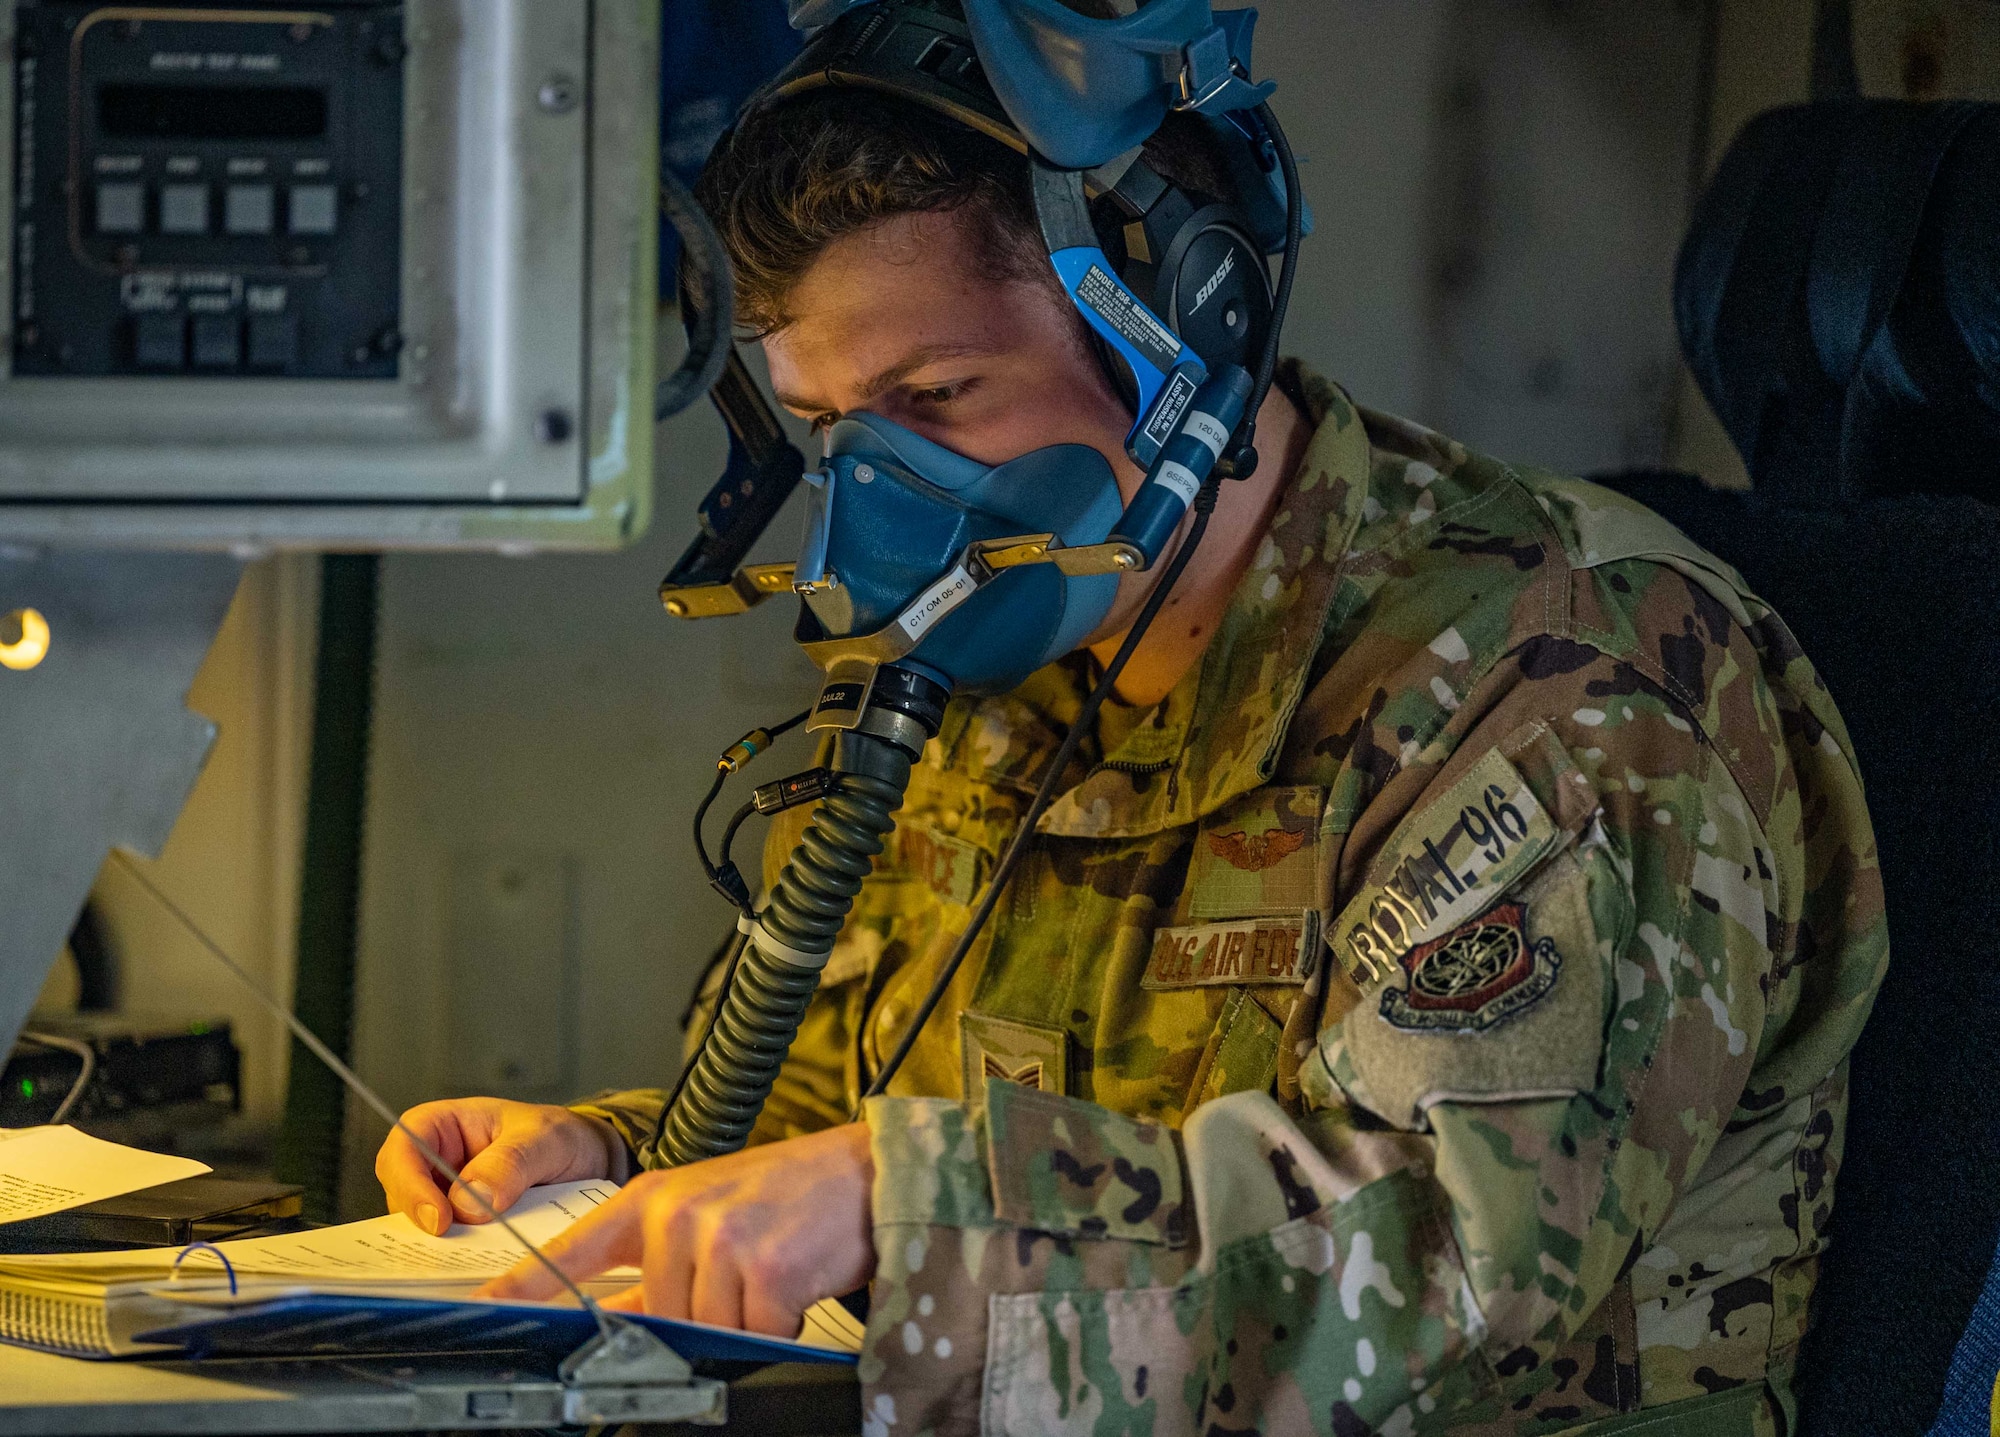 Staff Sgt. Daniel Lawrence, 3rd Airlift Squadron loadmaster, tests an oxygen mask before a local training mission aboard a C-17 Globemaster III at Dover Air Force Base, Delaware, June 15, 2022. The 3rd AS trains regularly to provide global reach with unique, outsized airlift capability. (U.S. Air Force photo by Senior Airman Faith Schaefer)